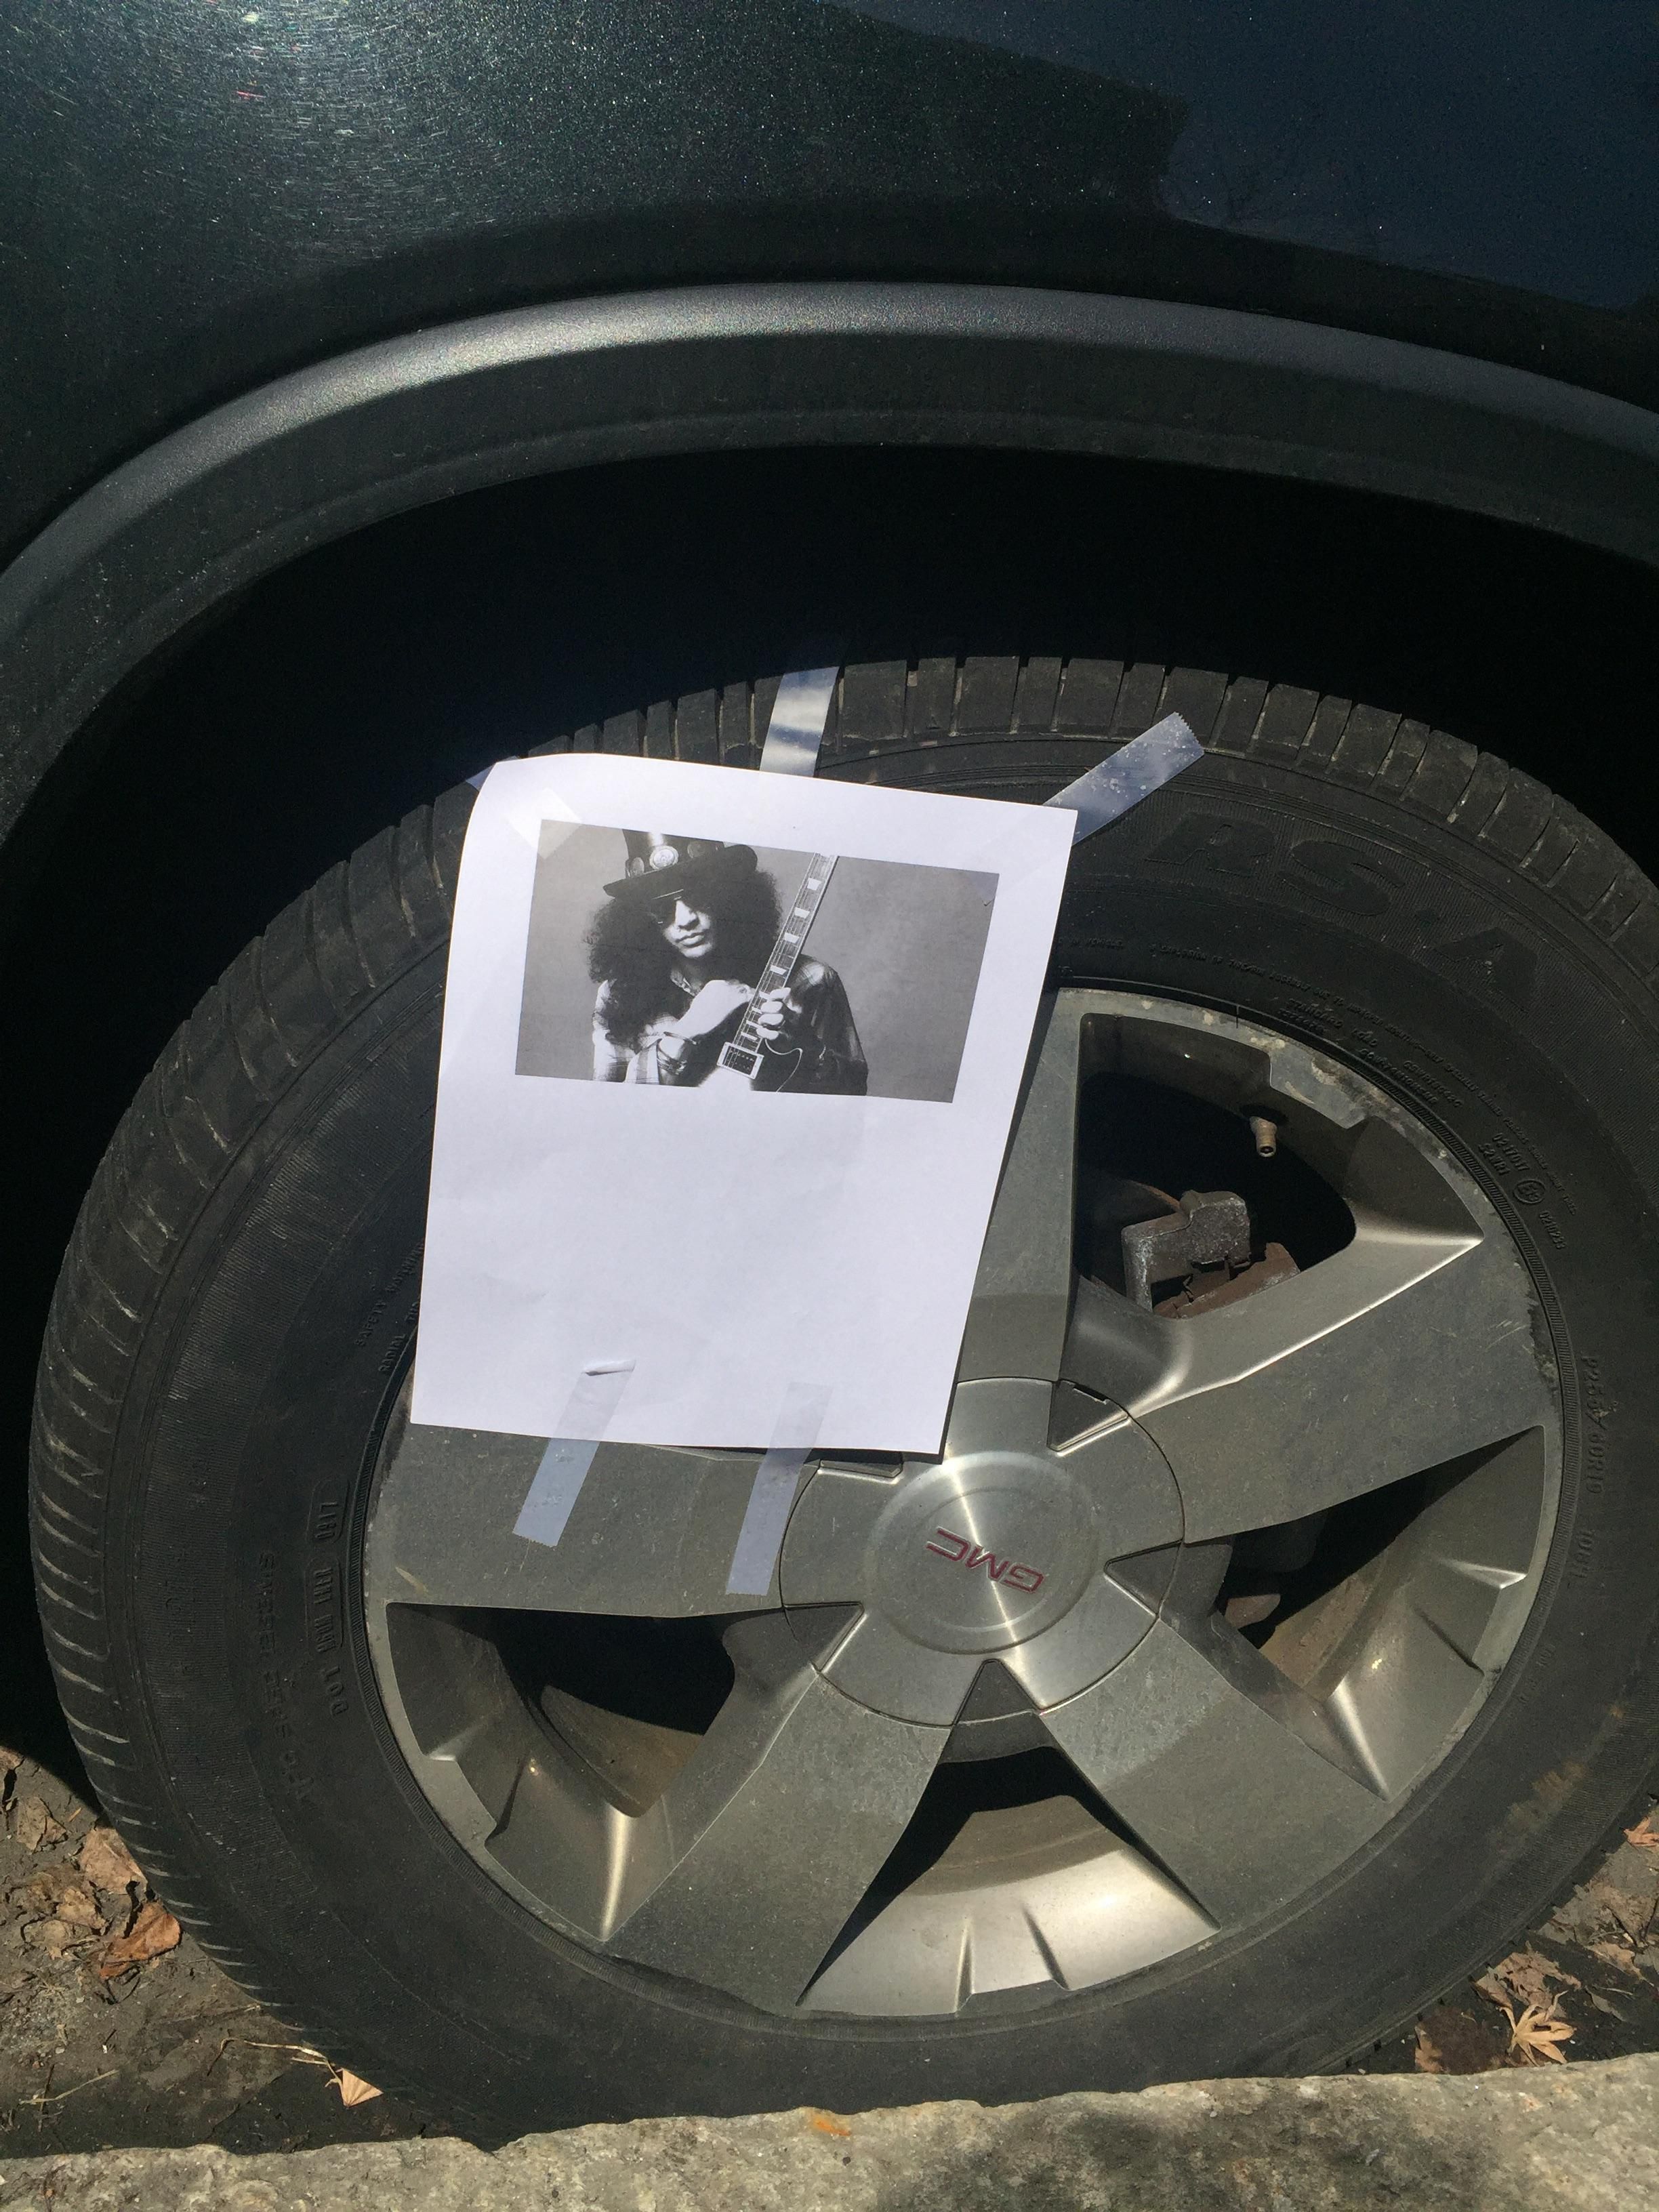 My brother thought it would be a great idea to Slash people’s tires for April Fool’s Day